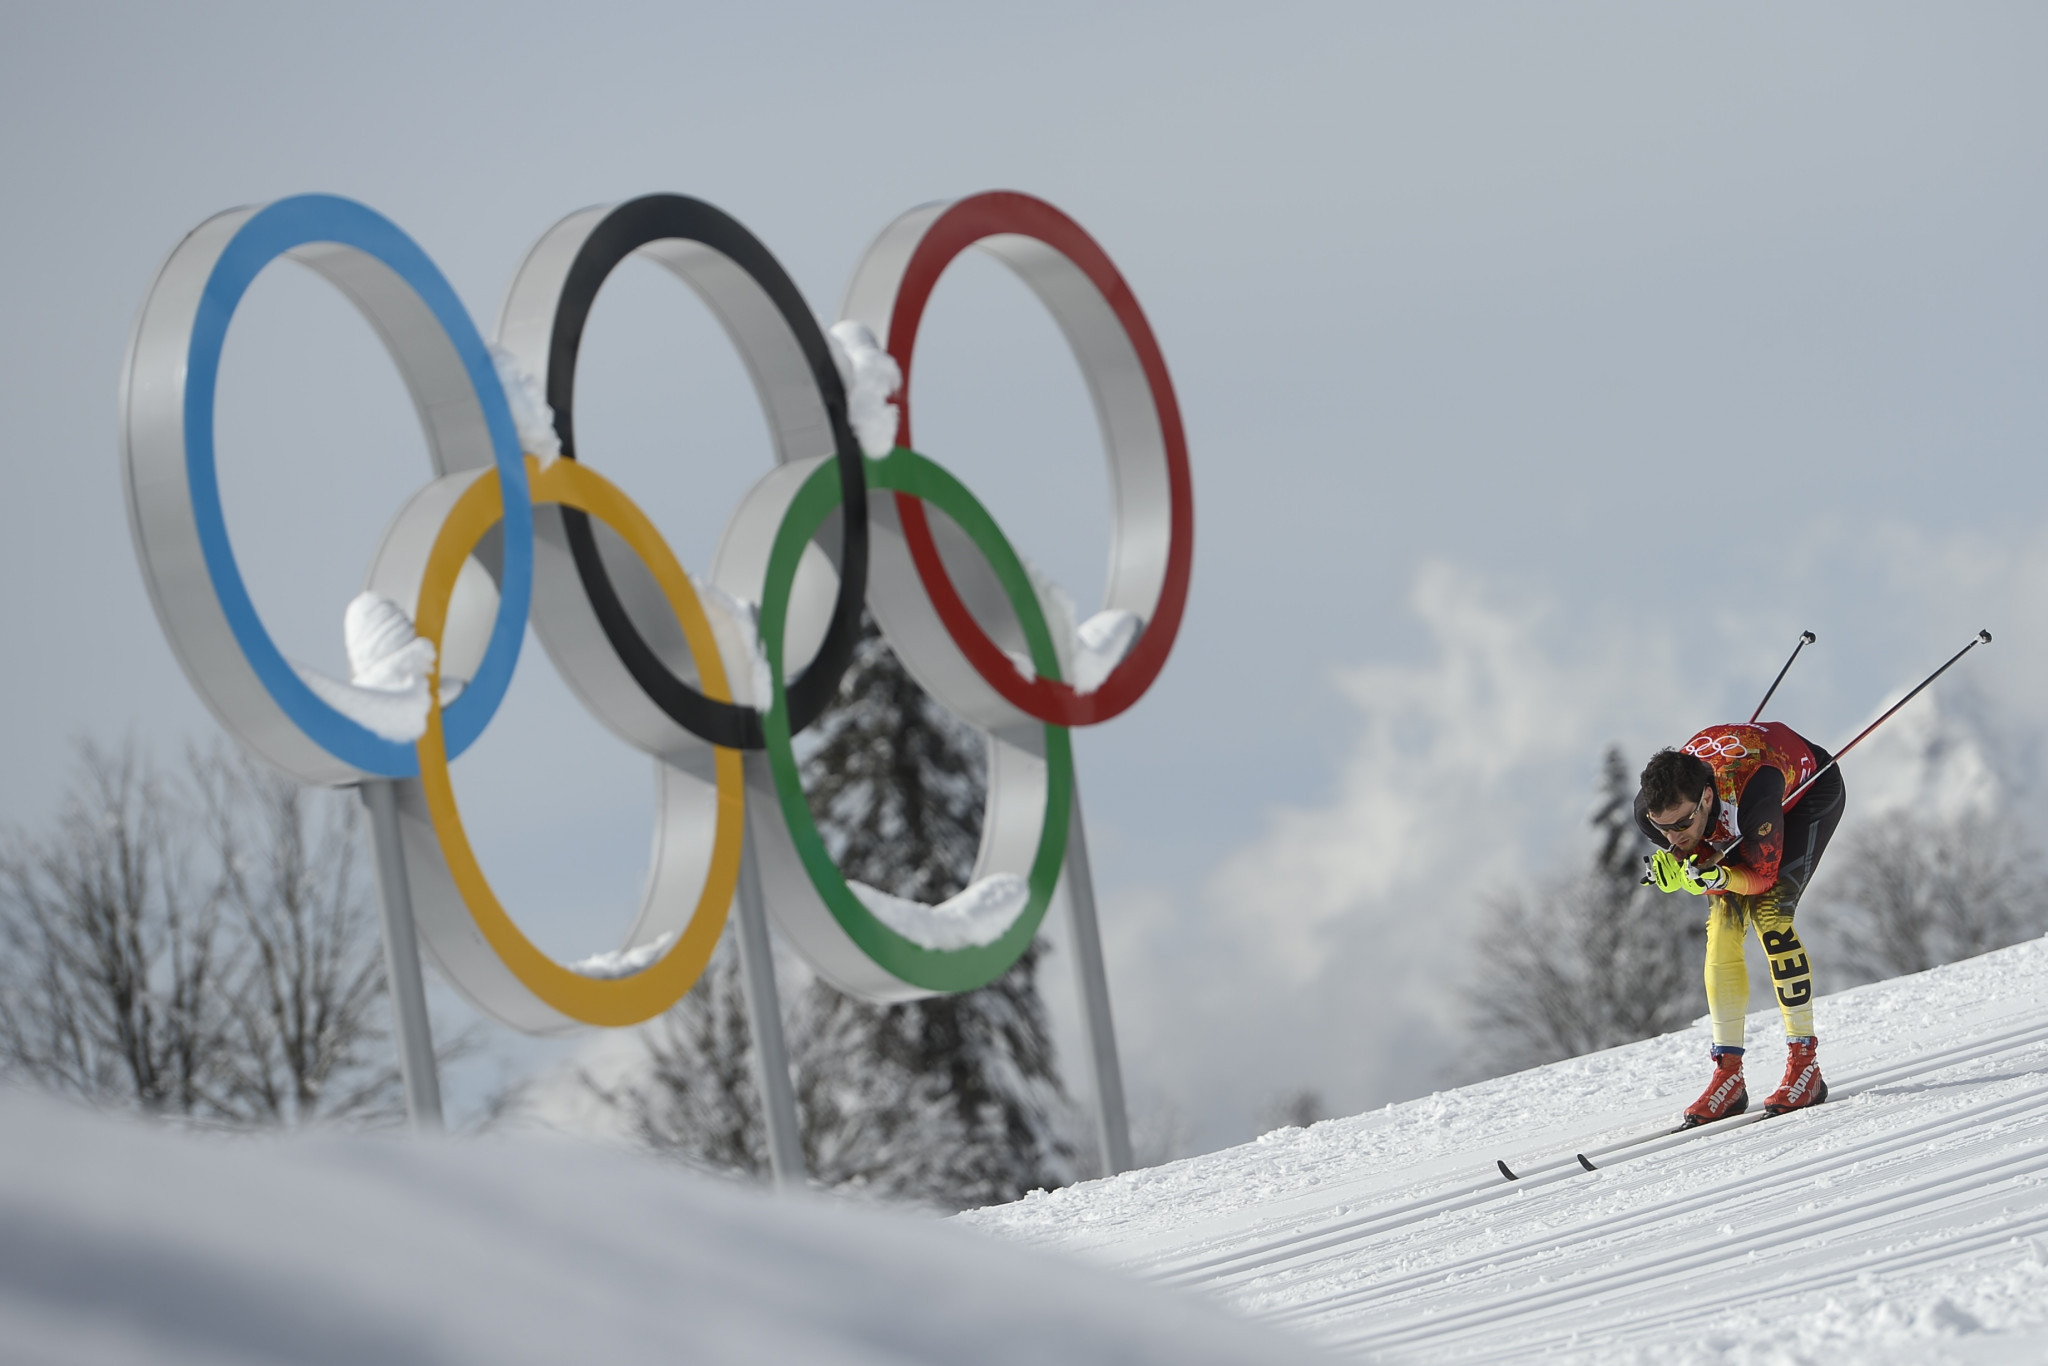 Hannes Dotzler represented Germany at the 2014 Winter Olympic Games in Sochi ©Getty Images